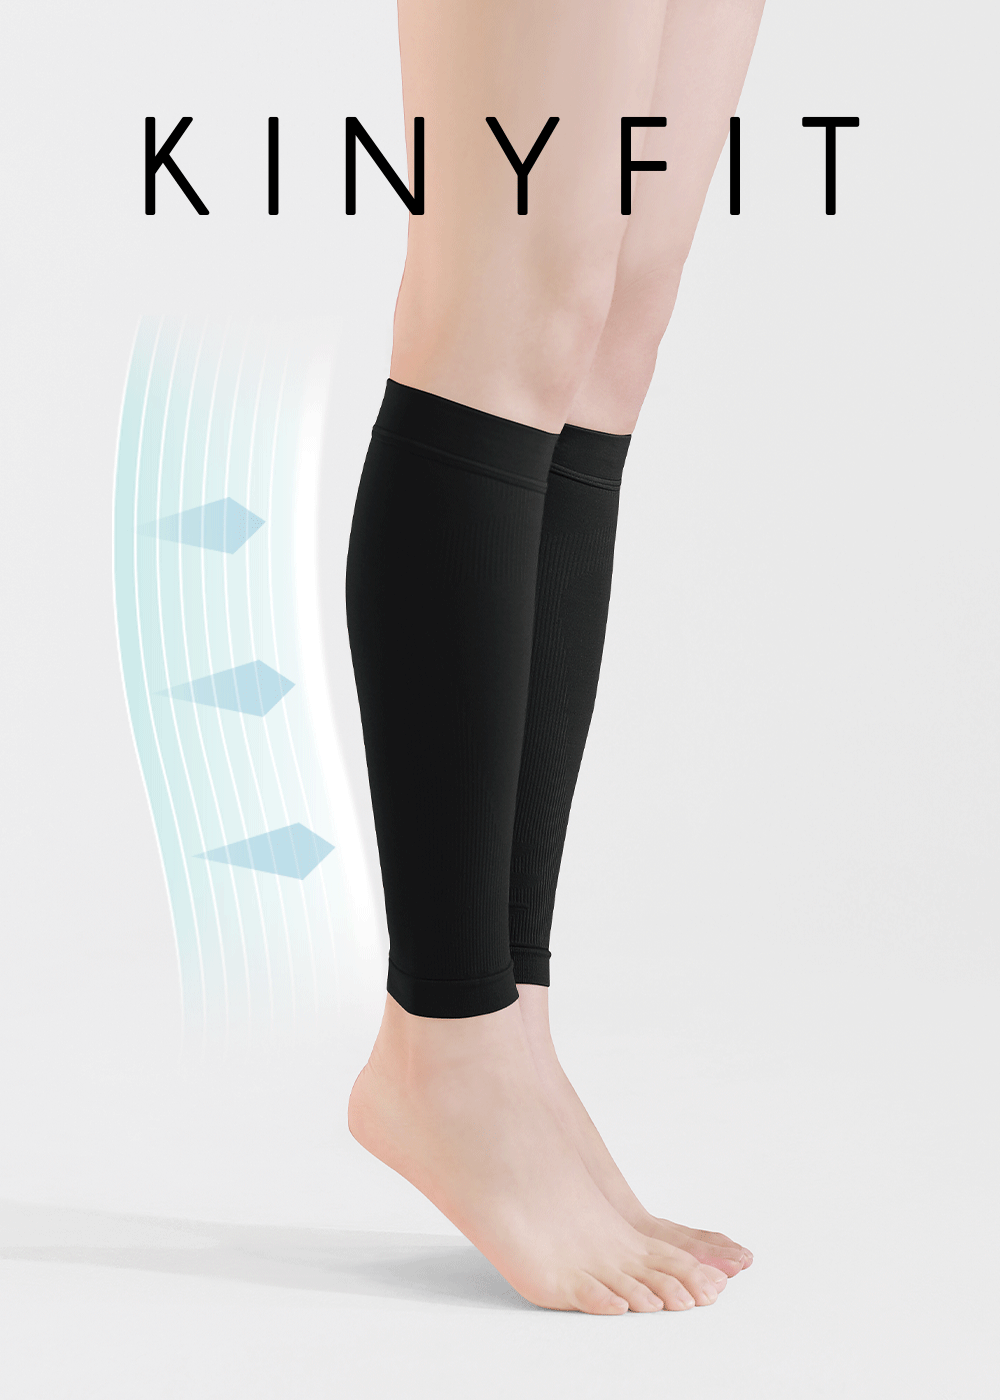 [Produced by Kinney] Kinney Fit Calf Pressure Stockings Black